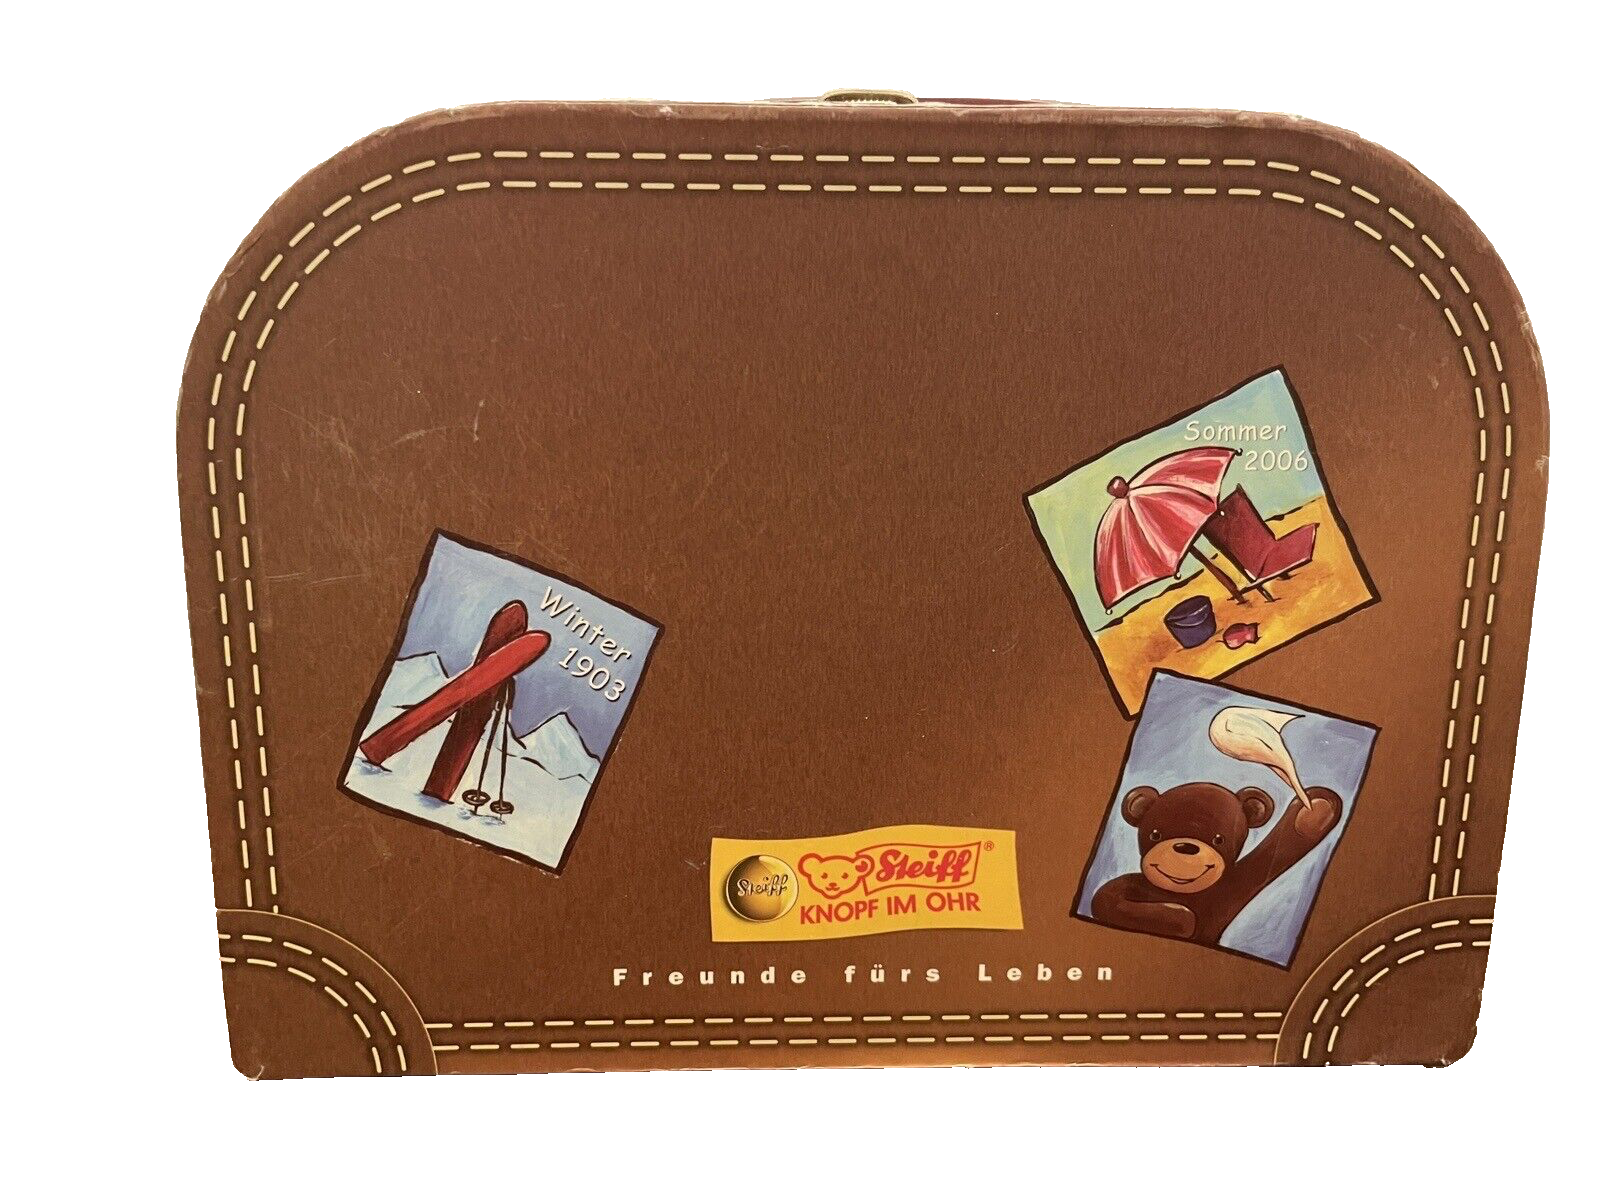 Primary image for Steiff Cardboard Suitcase for Teddy Bear 8 in x 6 in x 3 in Knopf IM OHR